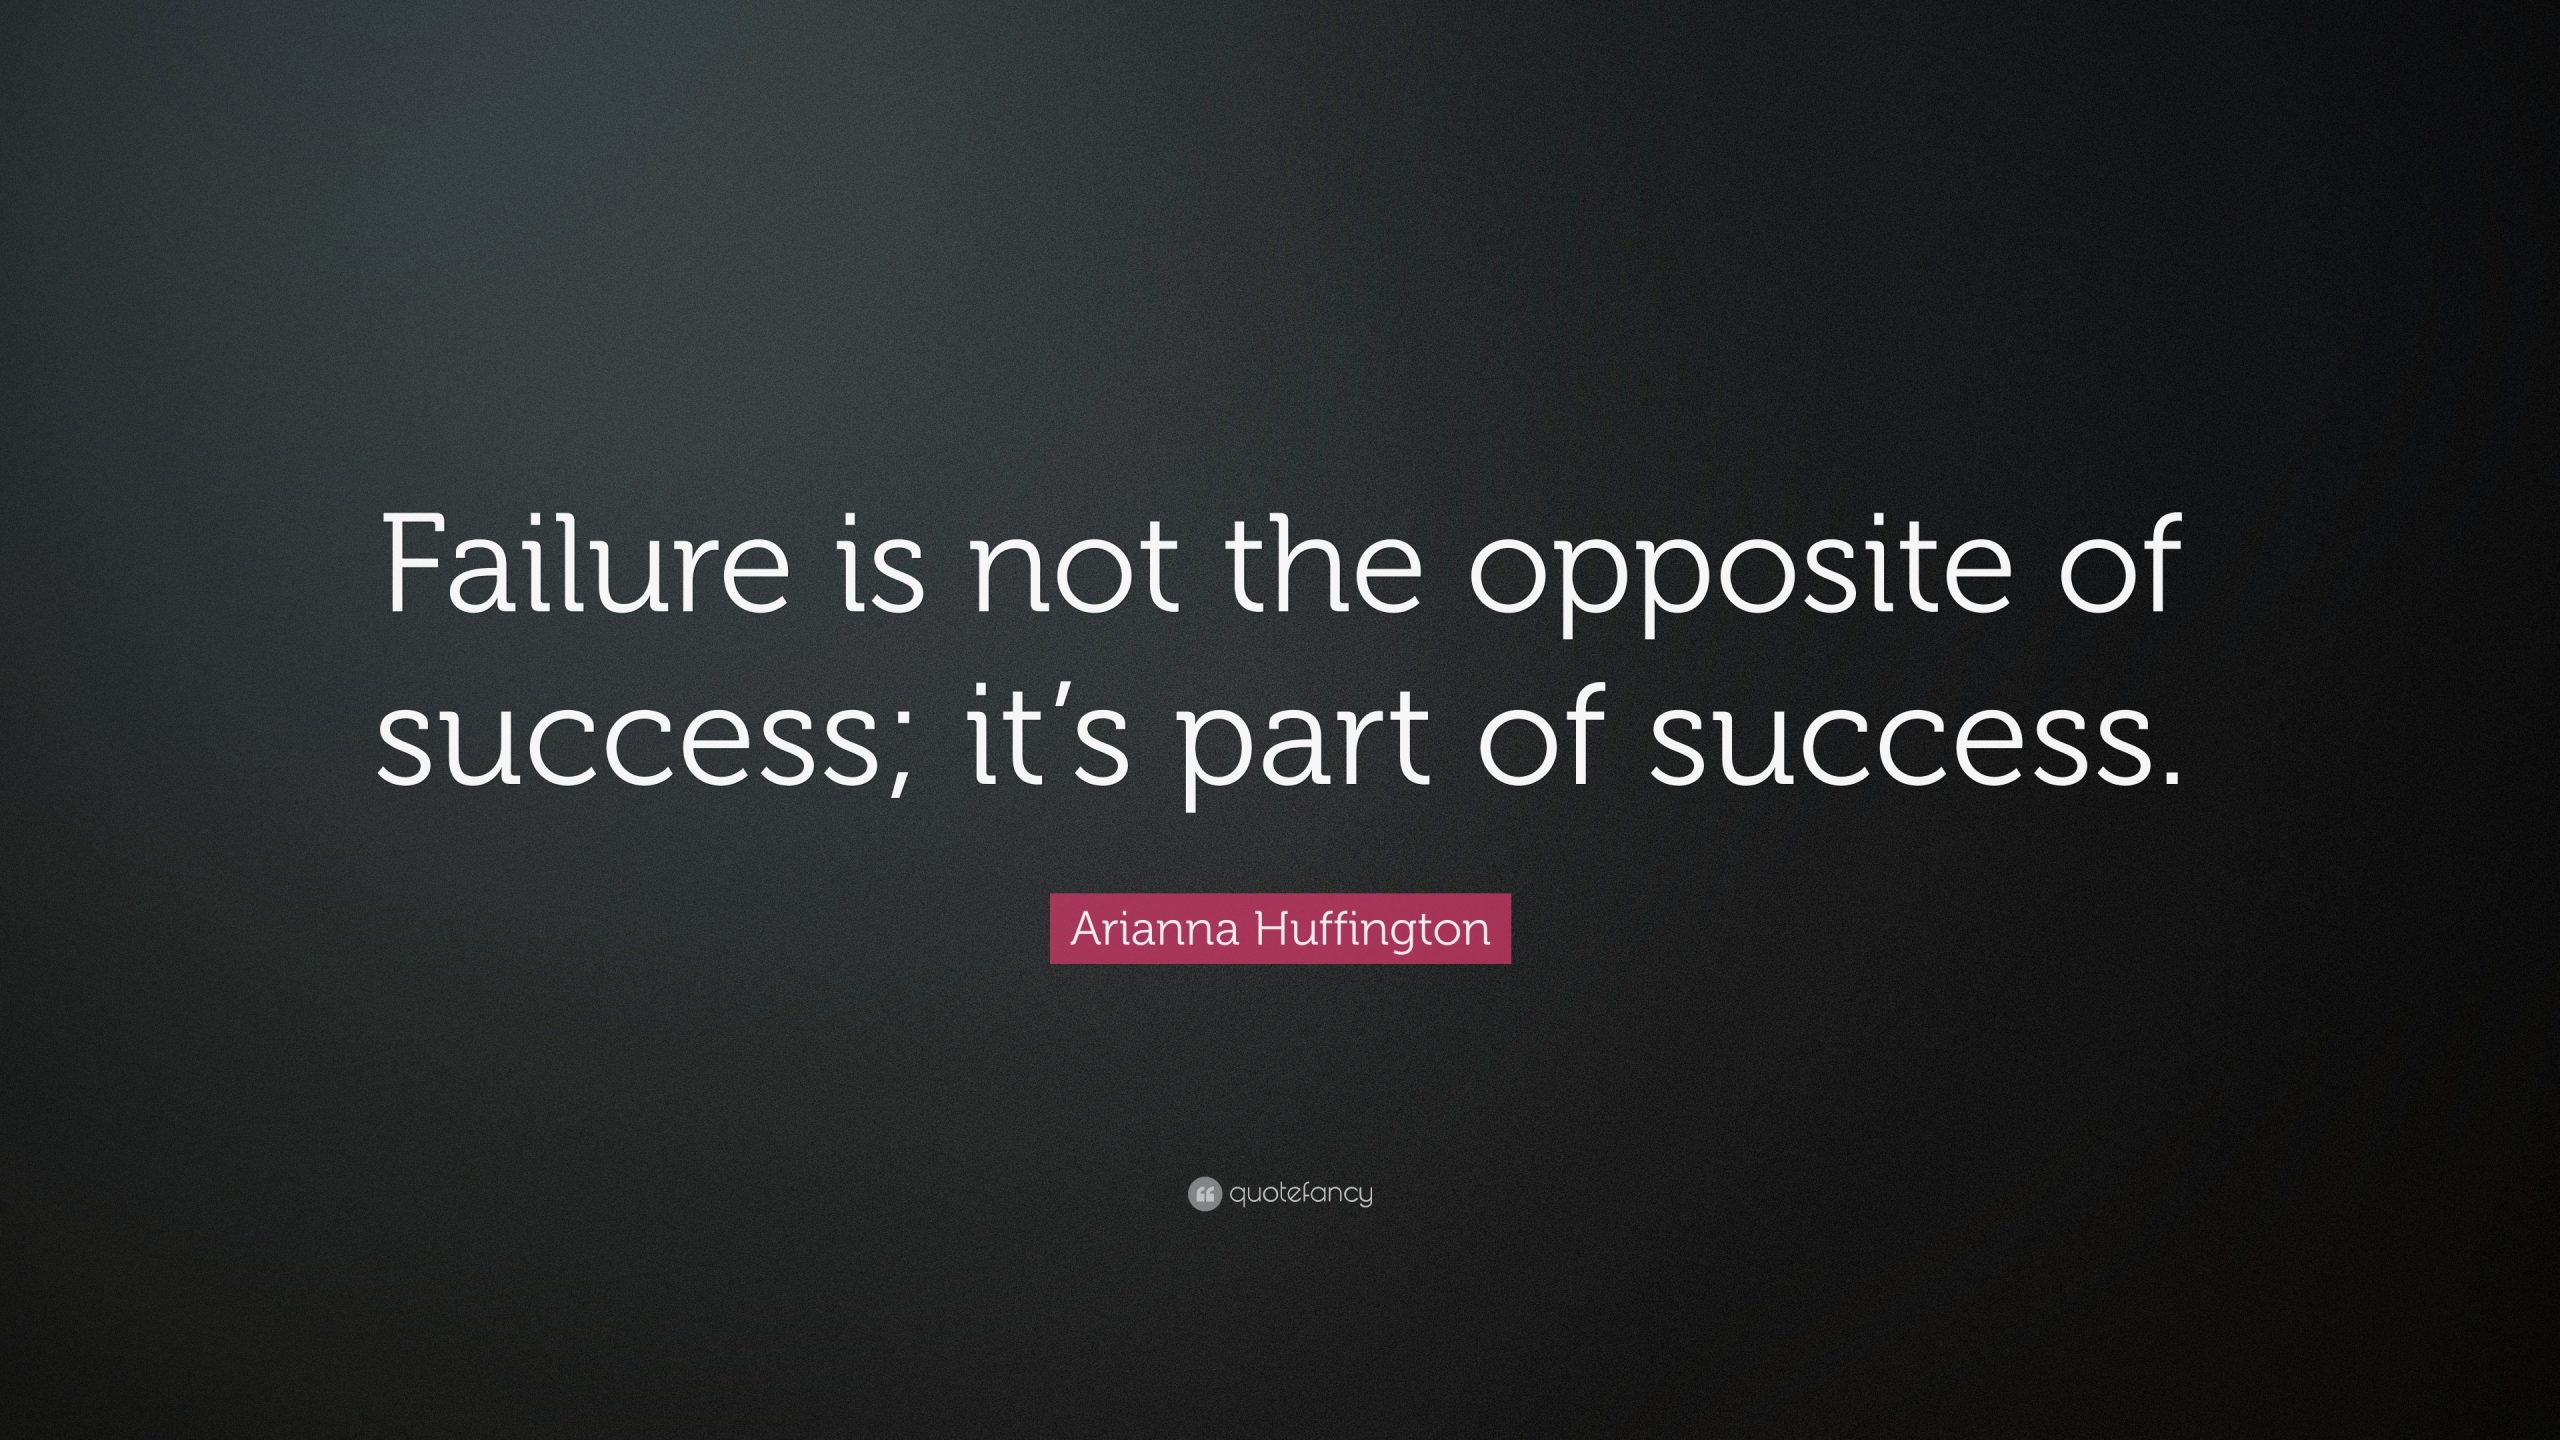 Quote by Arianna Huffington: "Failure is not the opposite of success; it's part of success."